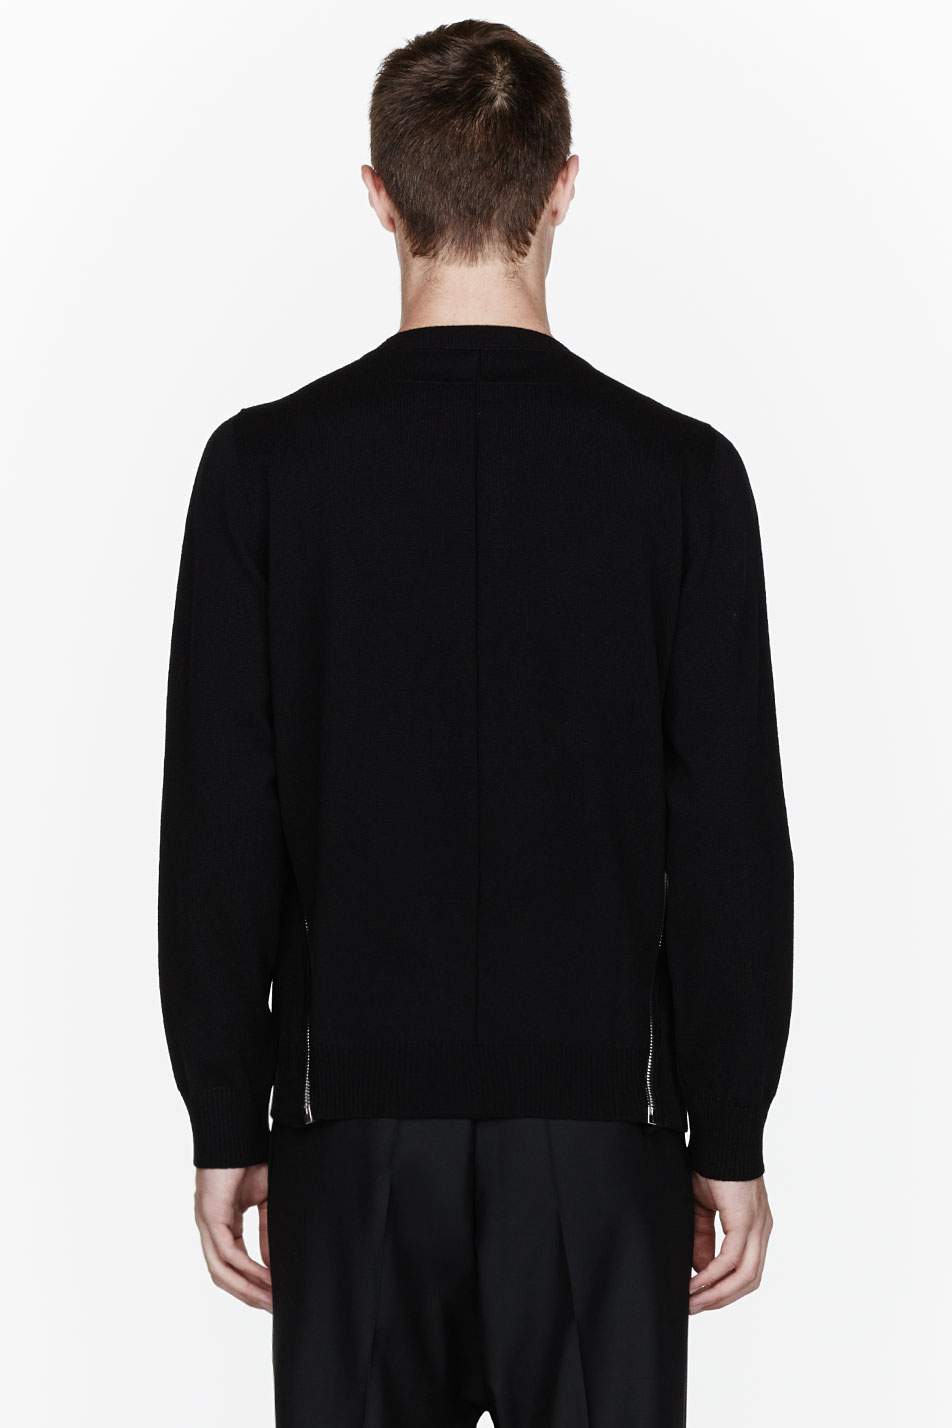 Lyst - Givenchy Black Zip_trimmed Sweater in Black for Men